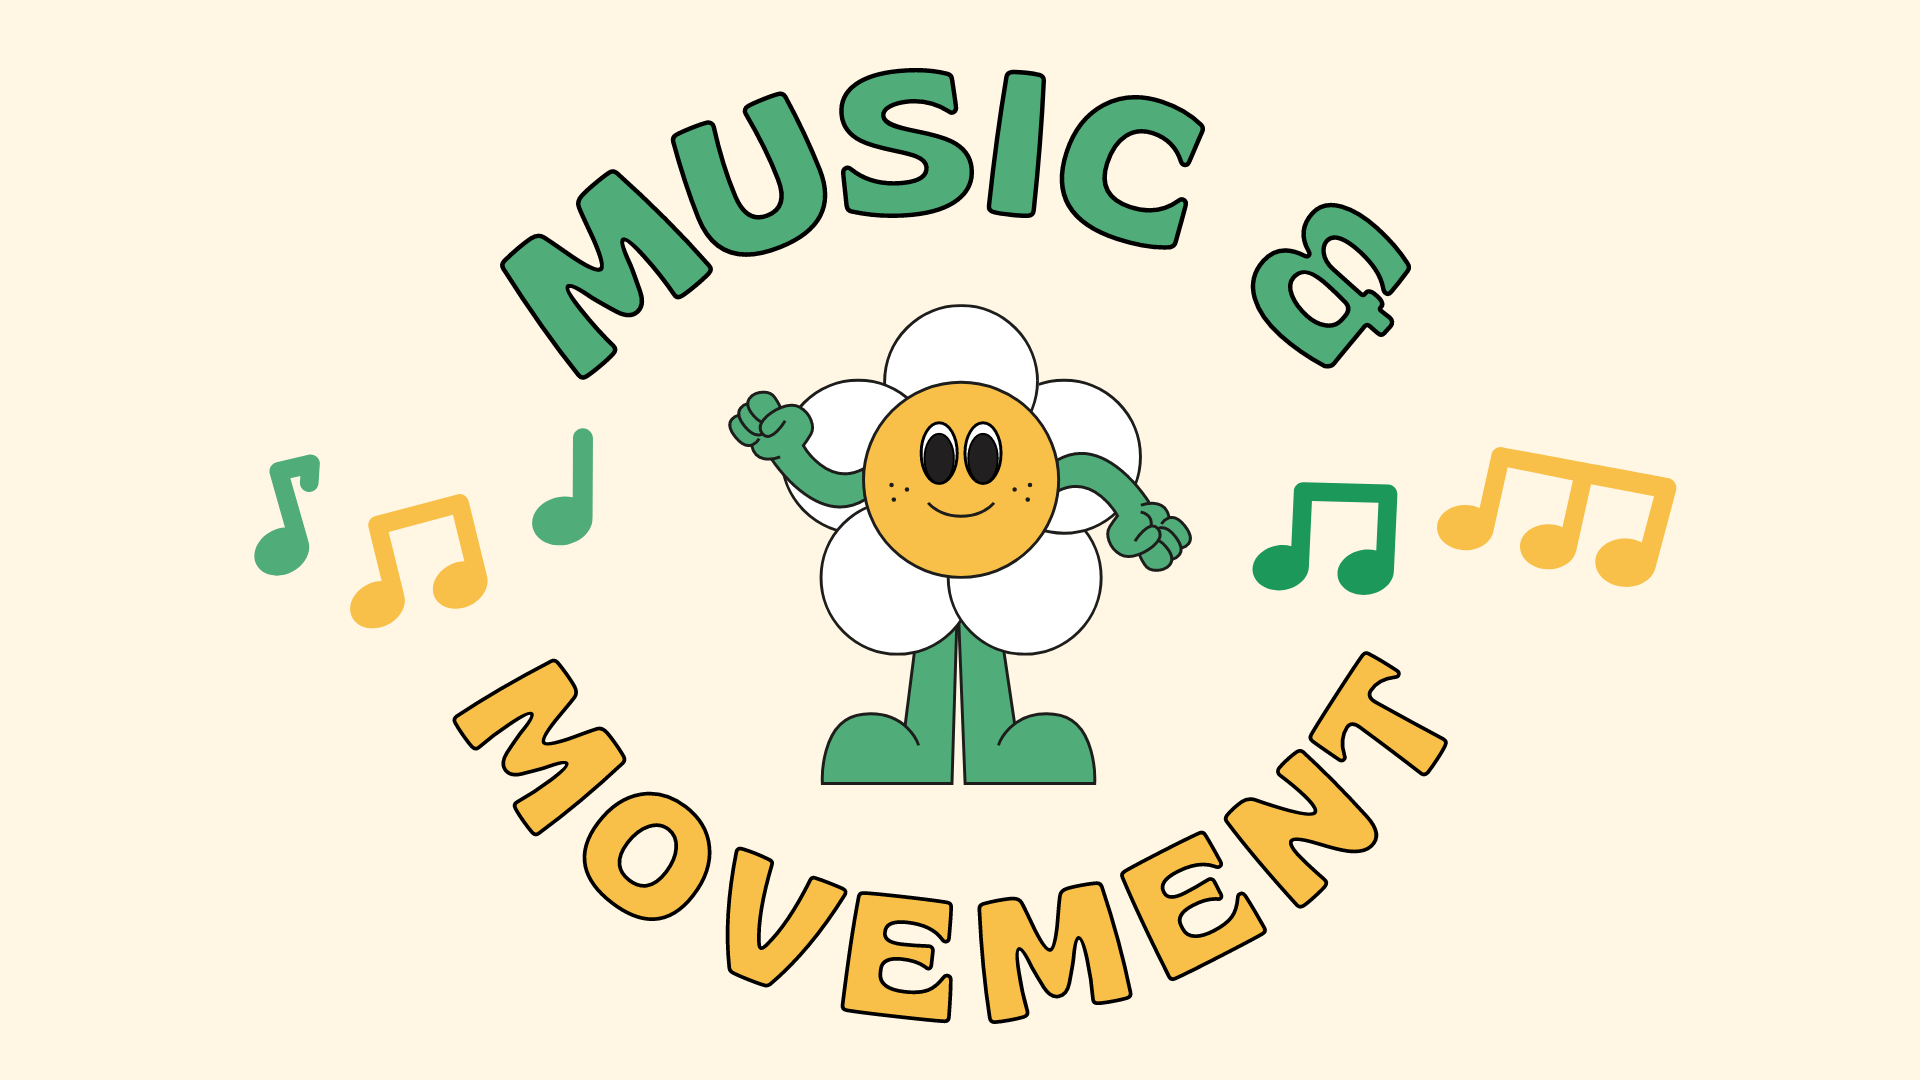 A dancing white, yellow, and green flower surrounded by music notes and the words Music and Movement